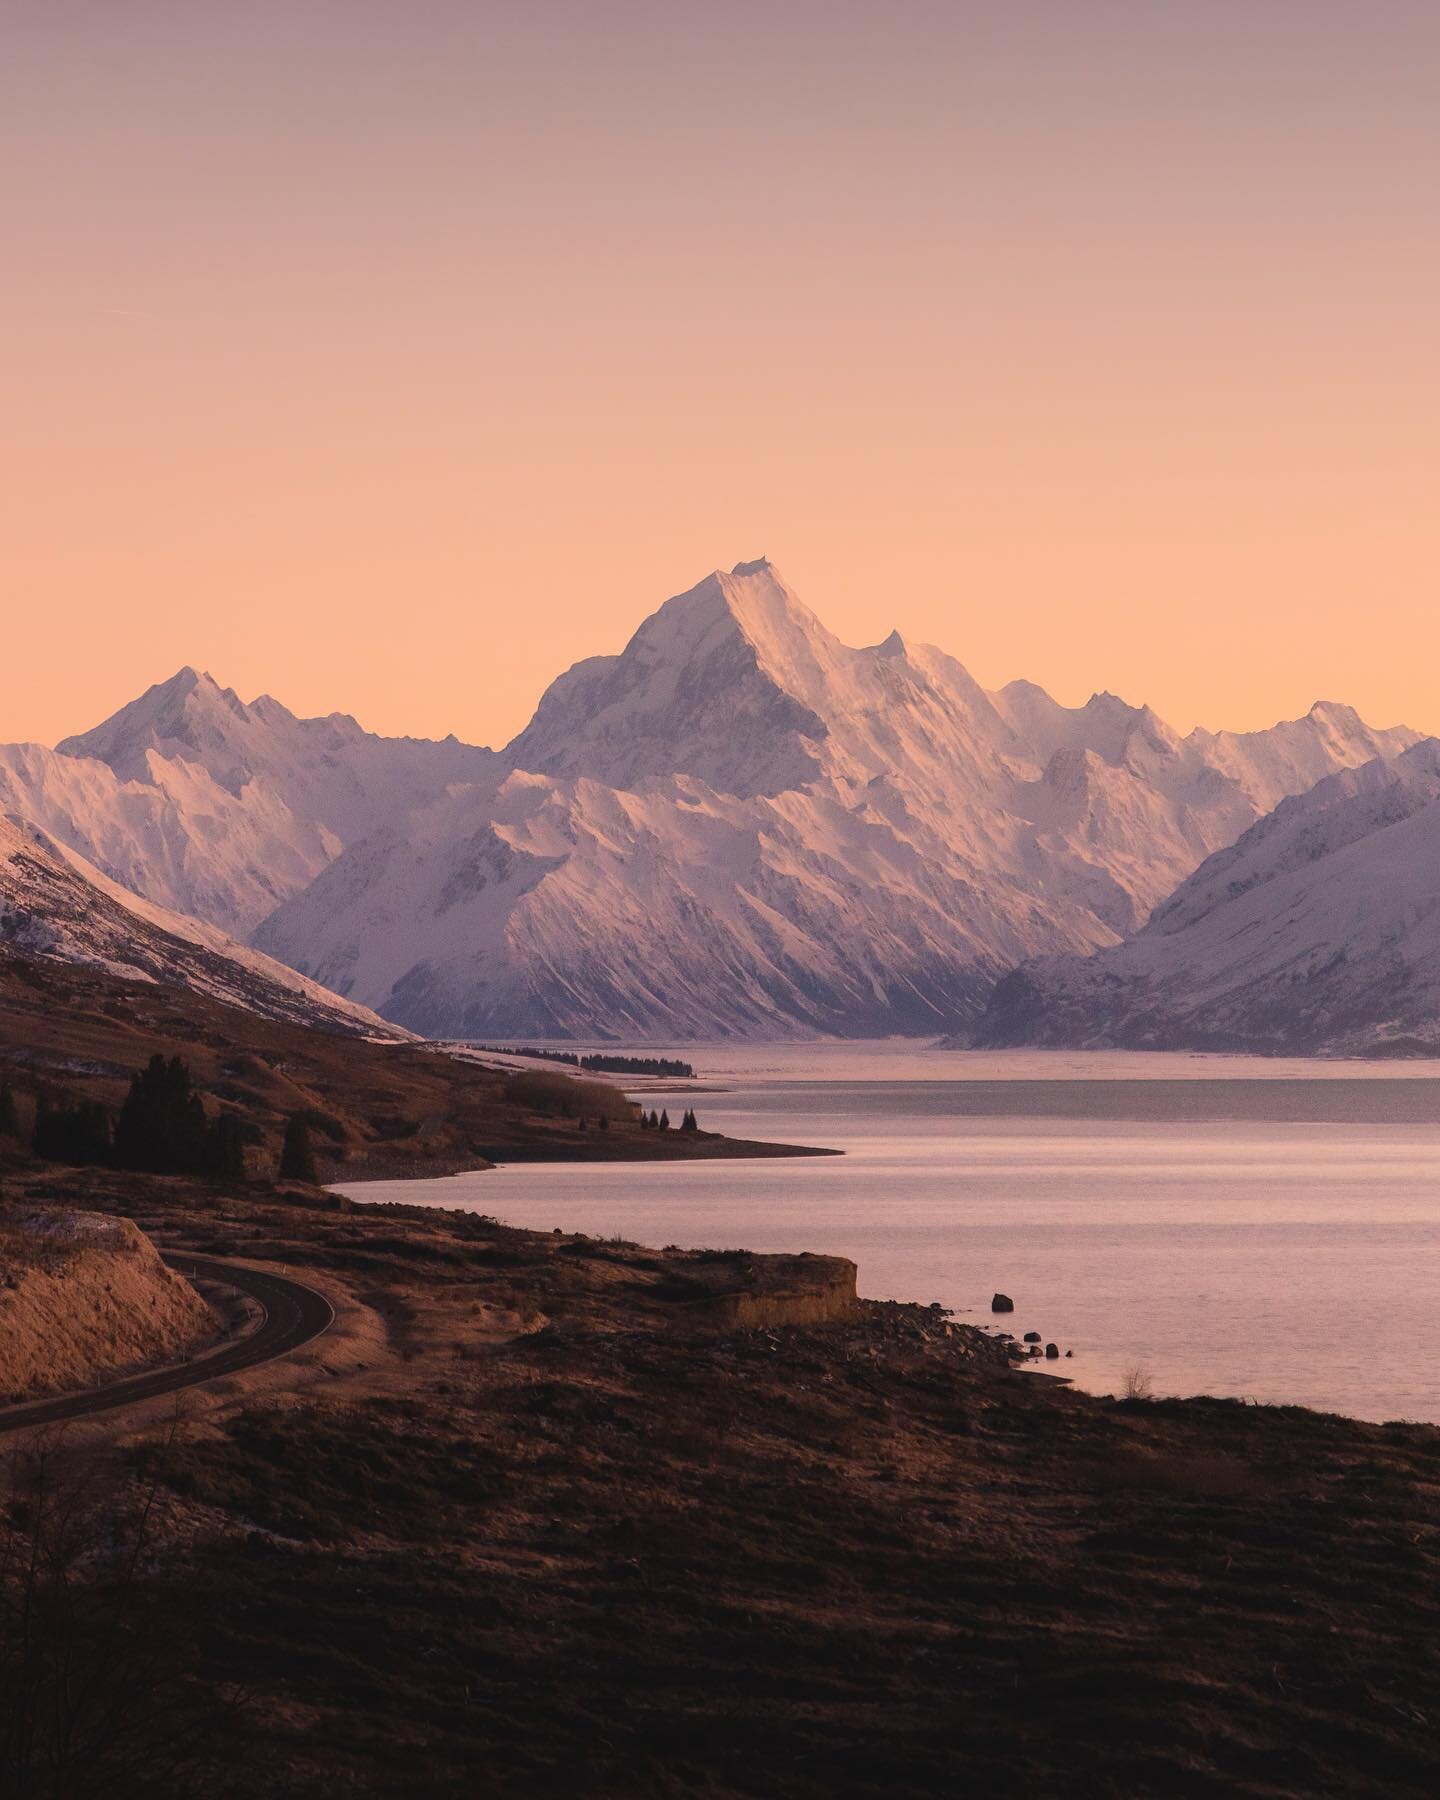 Views like this make the early morning wake ups all the more worthwhile&hellip;
.
.
.
#newzealand #nz #purenewzealand #mtcook #earth